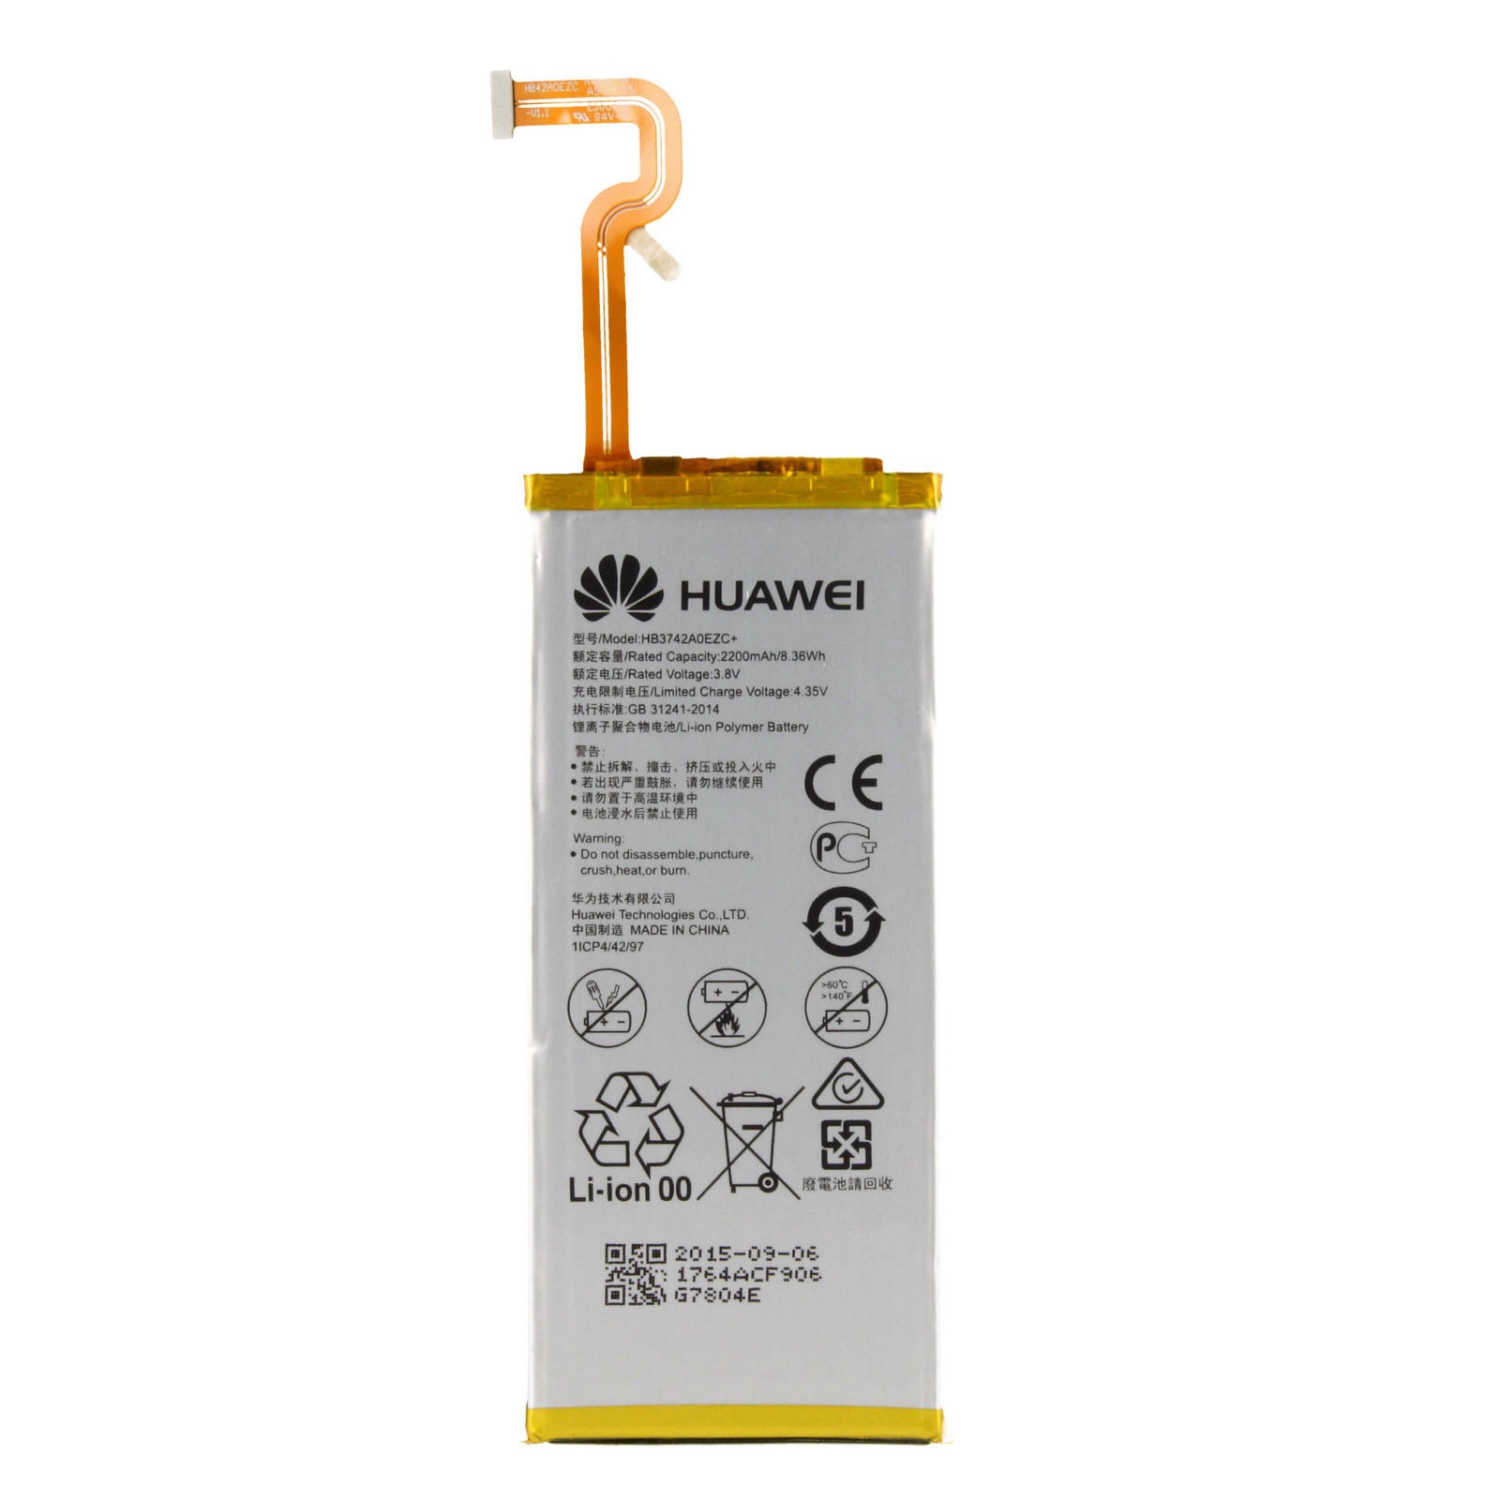 Replacement Battery for Huawei Ascend P8 Lite, HB3742A0EZC+